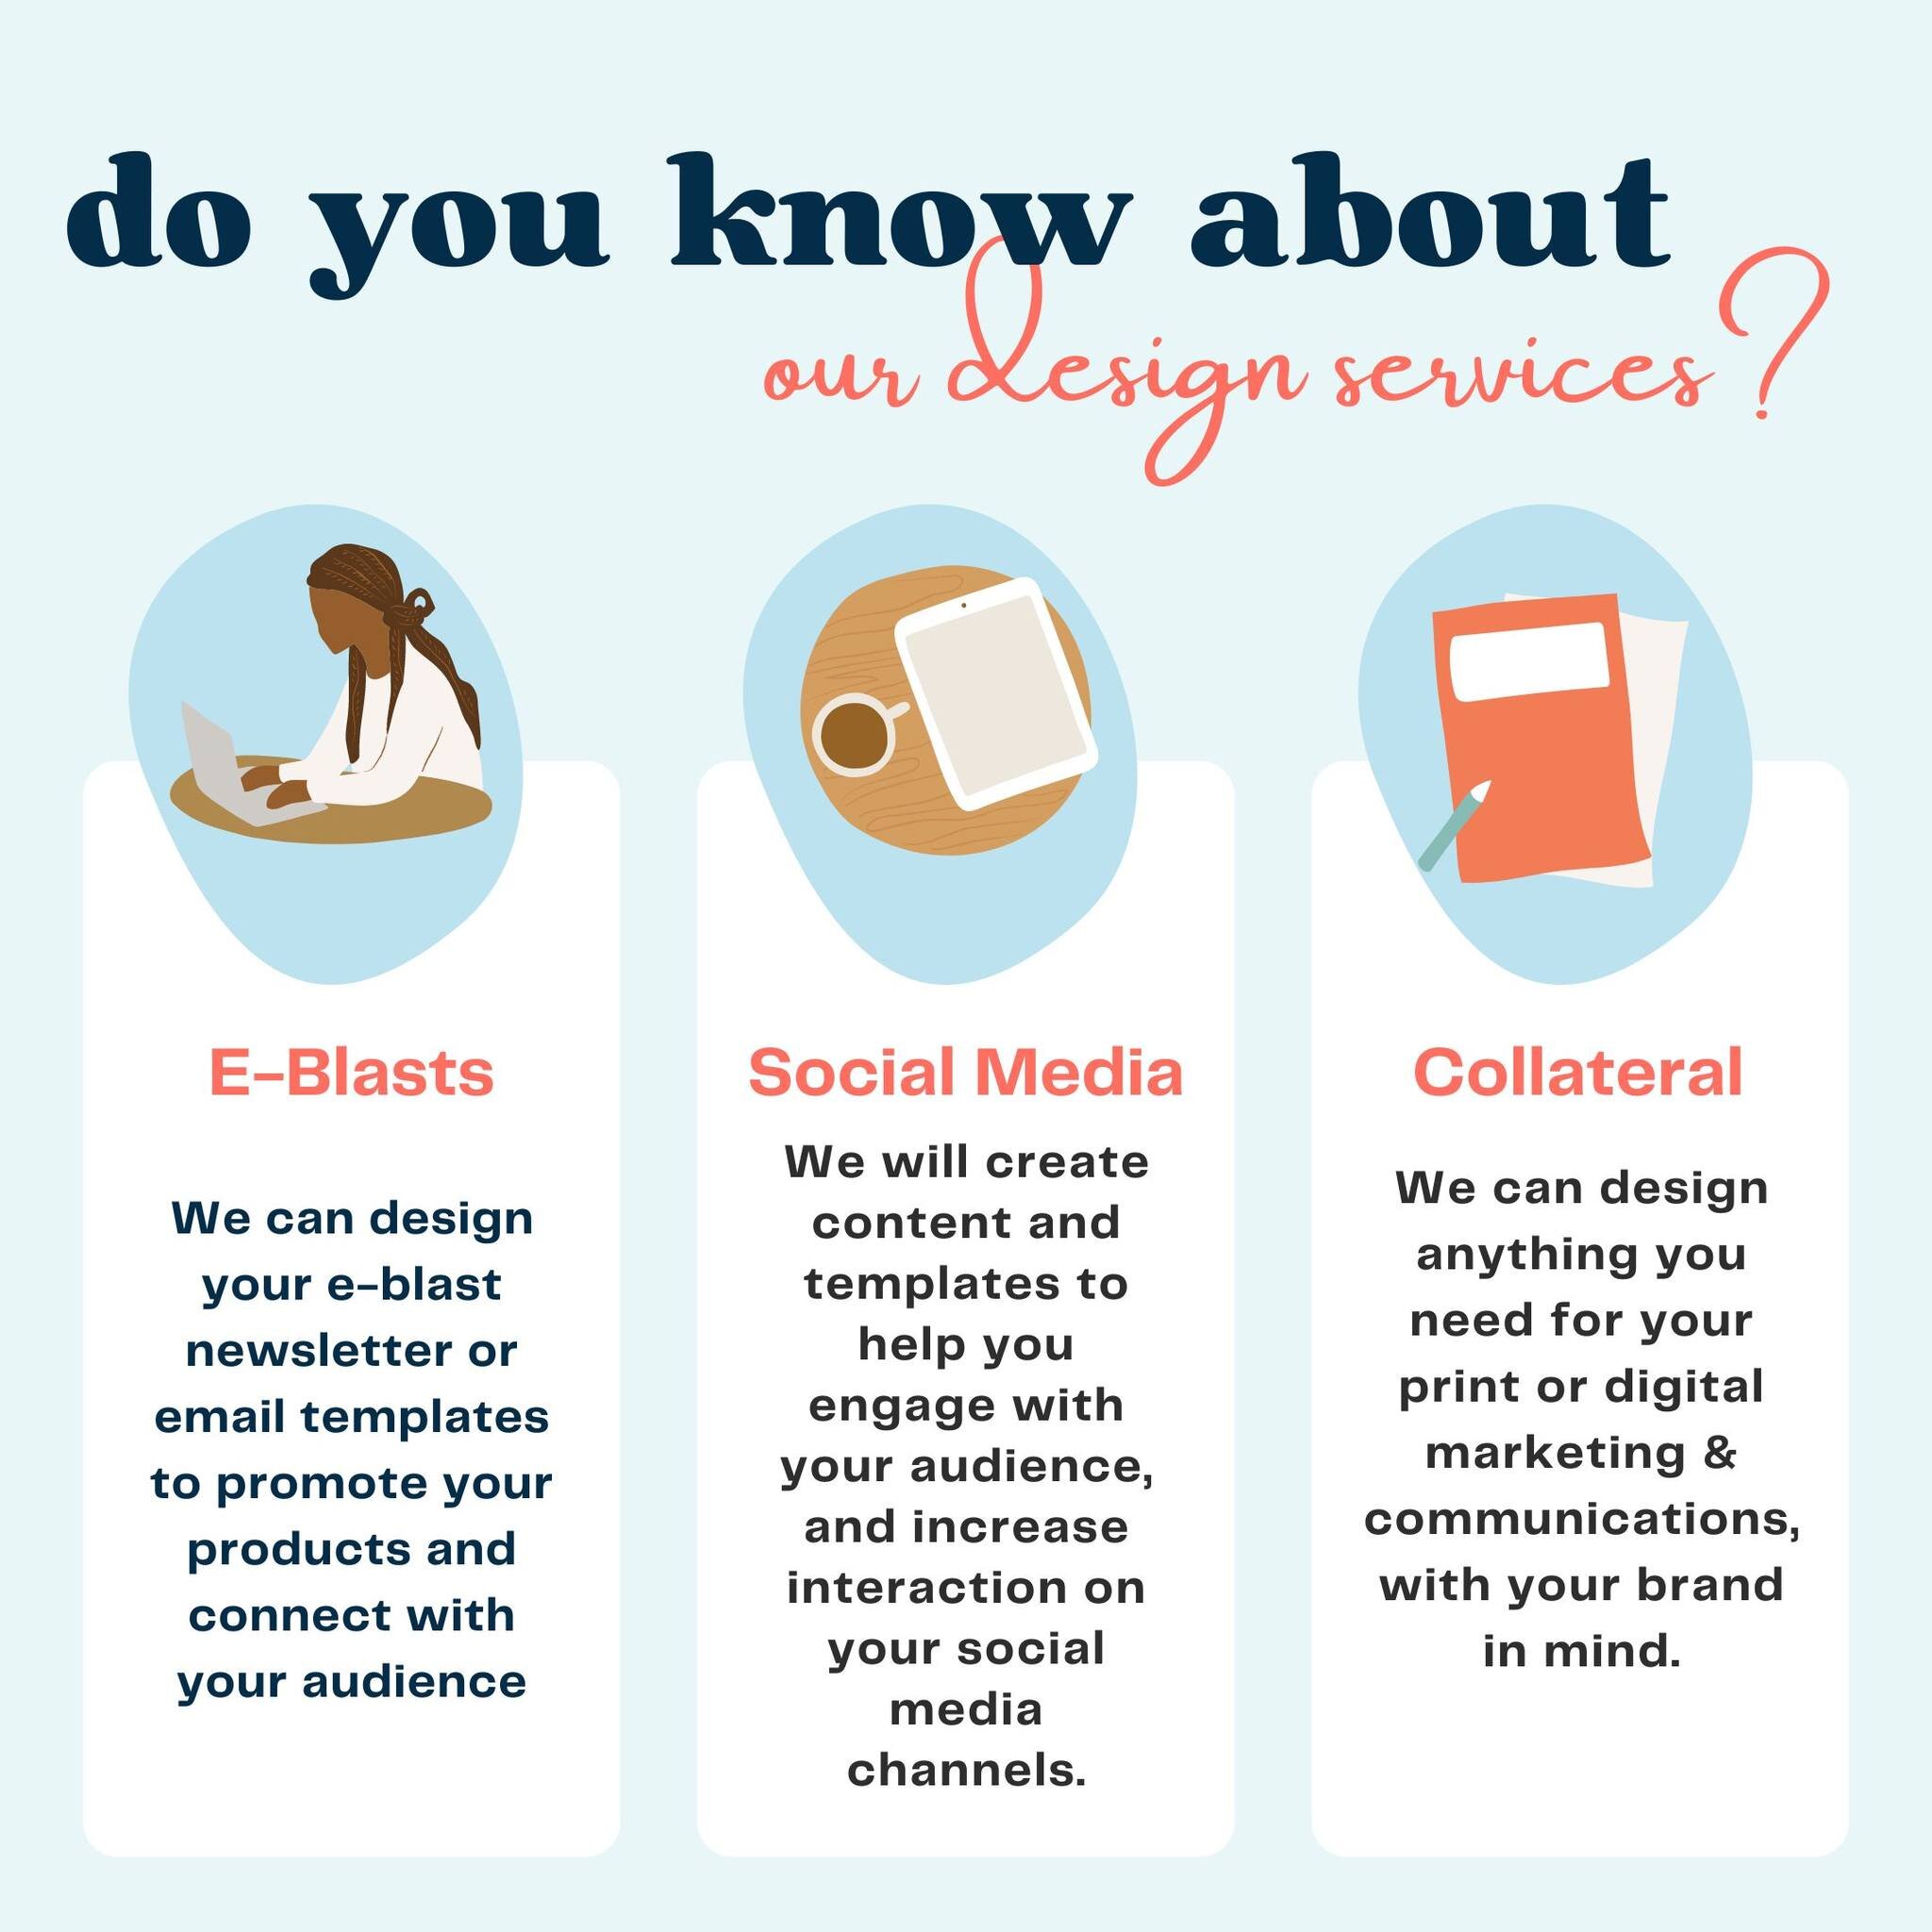 New to what we can do for you? For all you visual people out there, here's an infographic! Head to https://www.pfeiferdesign.com for ALL the things 🤩

 #branding #brandstrategy #branddevelopment #graphicdesigner #brandstyleguide #njgraphicdesigner #